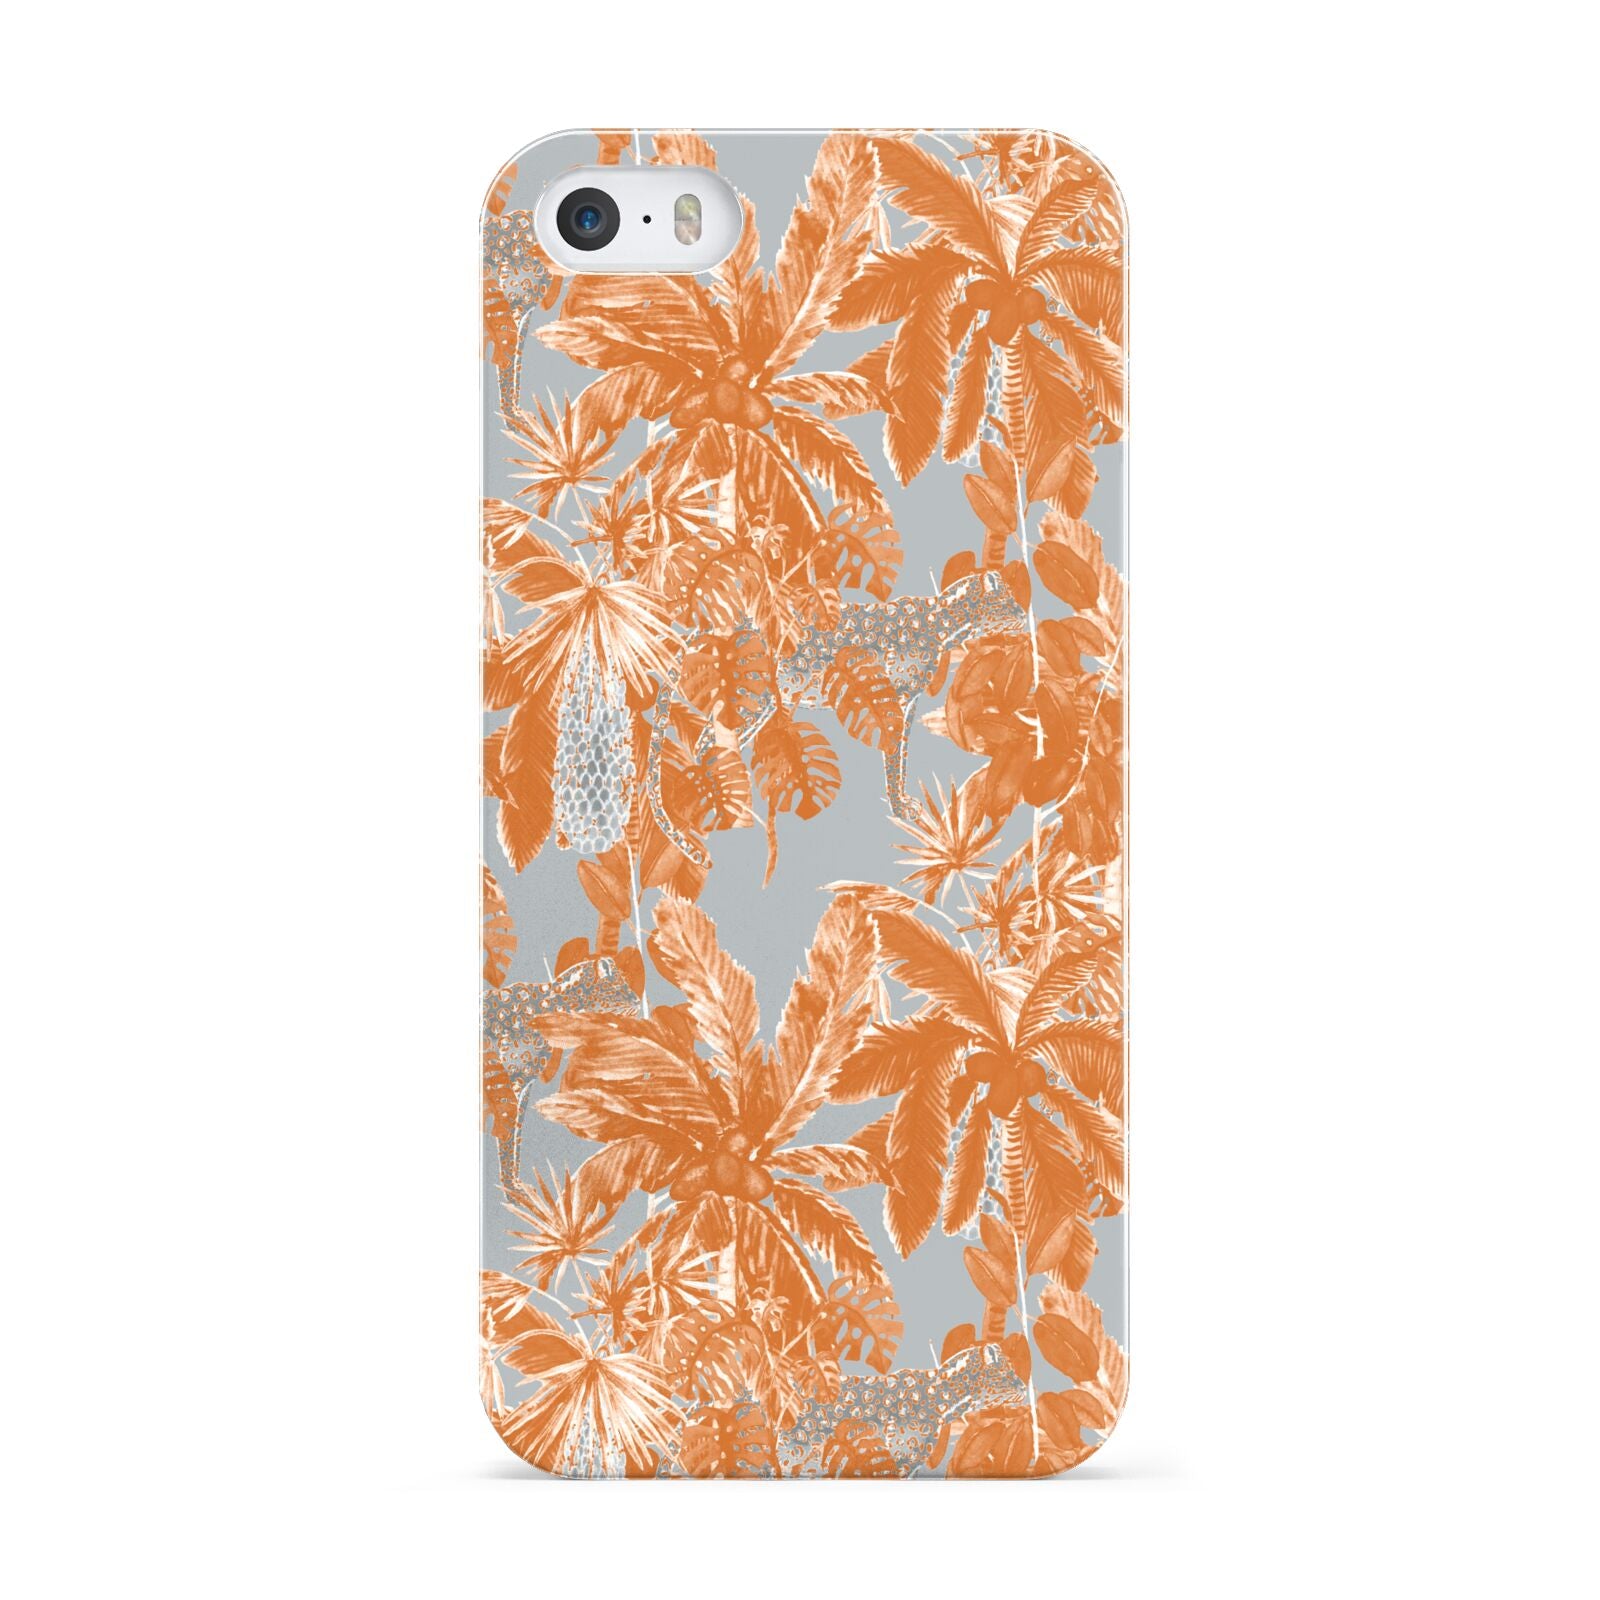 Tropical Apple iPhone 5 Case